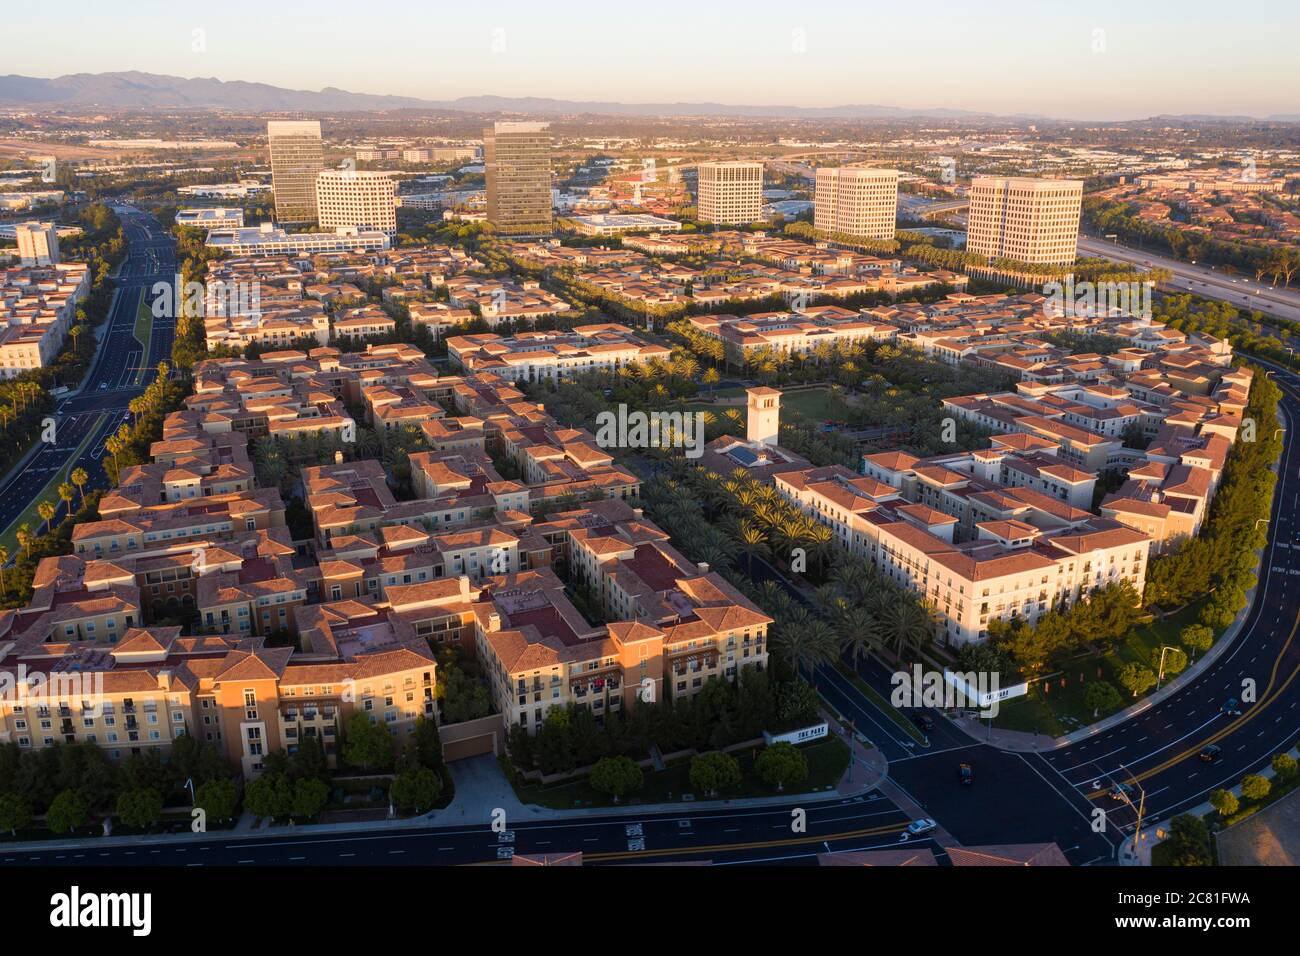 Aerial view of the Park and the Village with the towers of the Irvine Spectrum center in Southern California Stock Photo